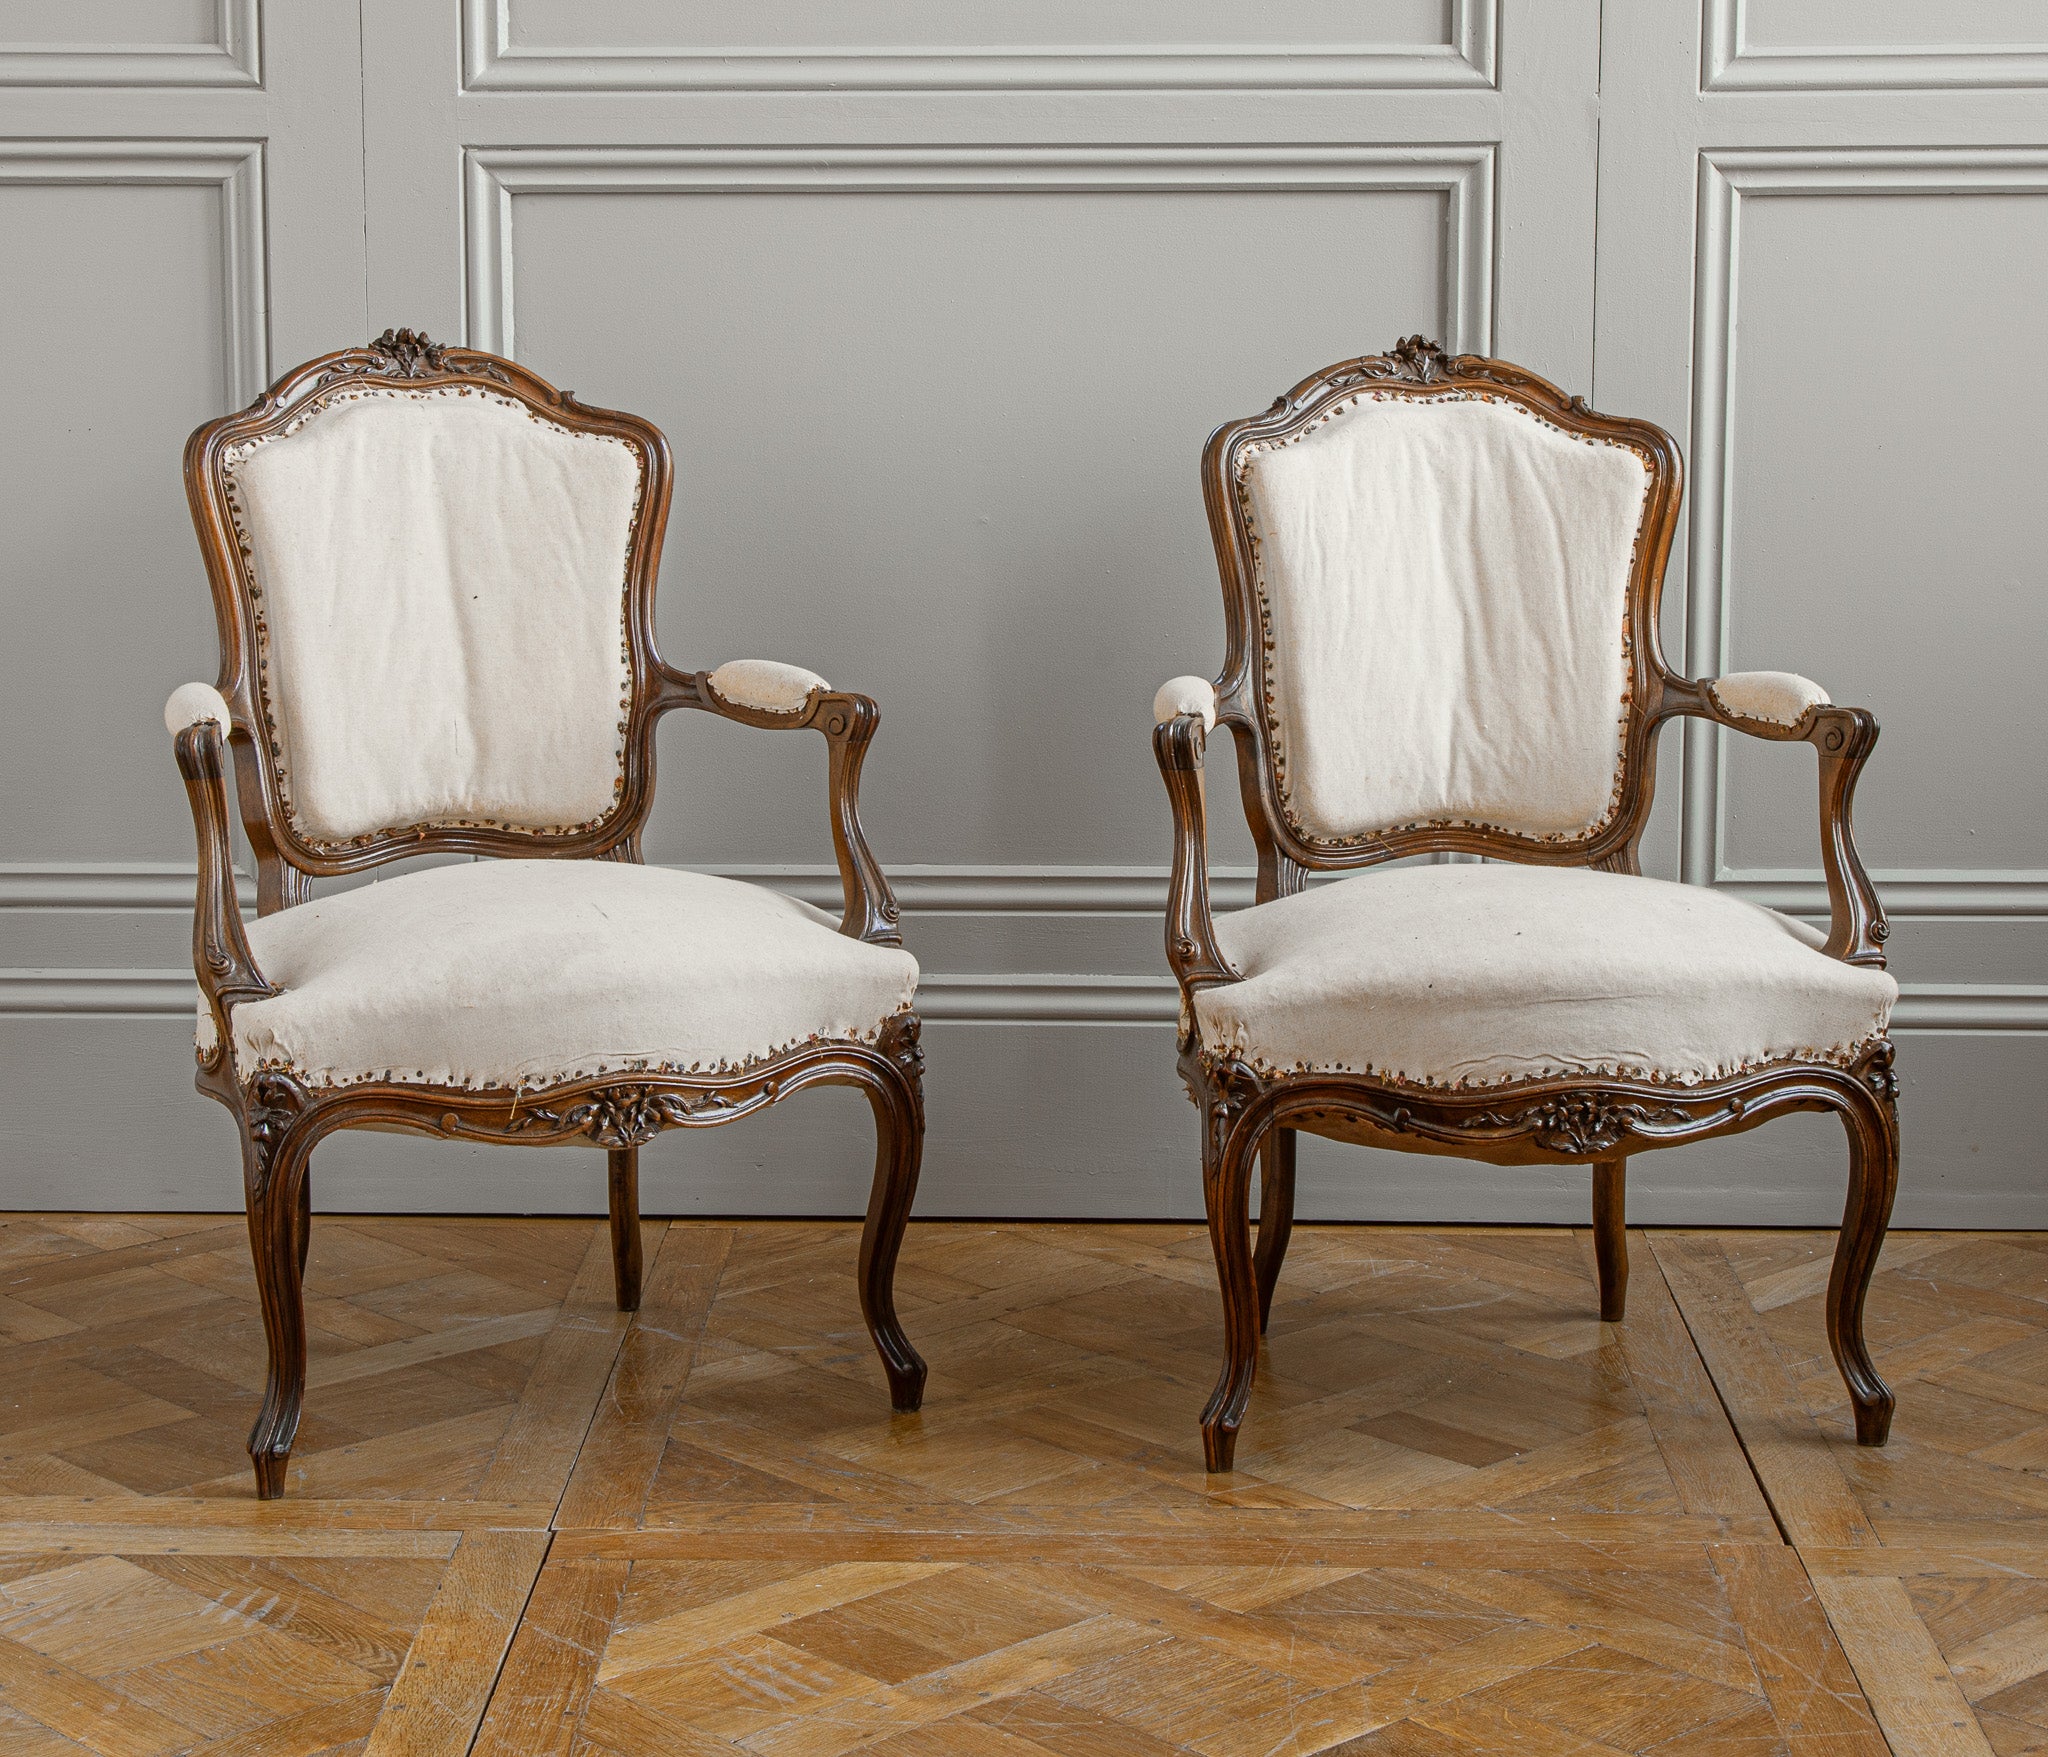 A pair of Louis XV style hand-carved solid walnut Armchairs circa early 1900's, from France.
The chairs have some pretty detailing in the fine carving on the chairs featuring small flowers. 
We offer upholstery on request with a large selection of